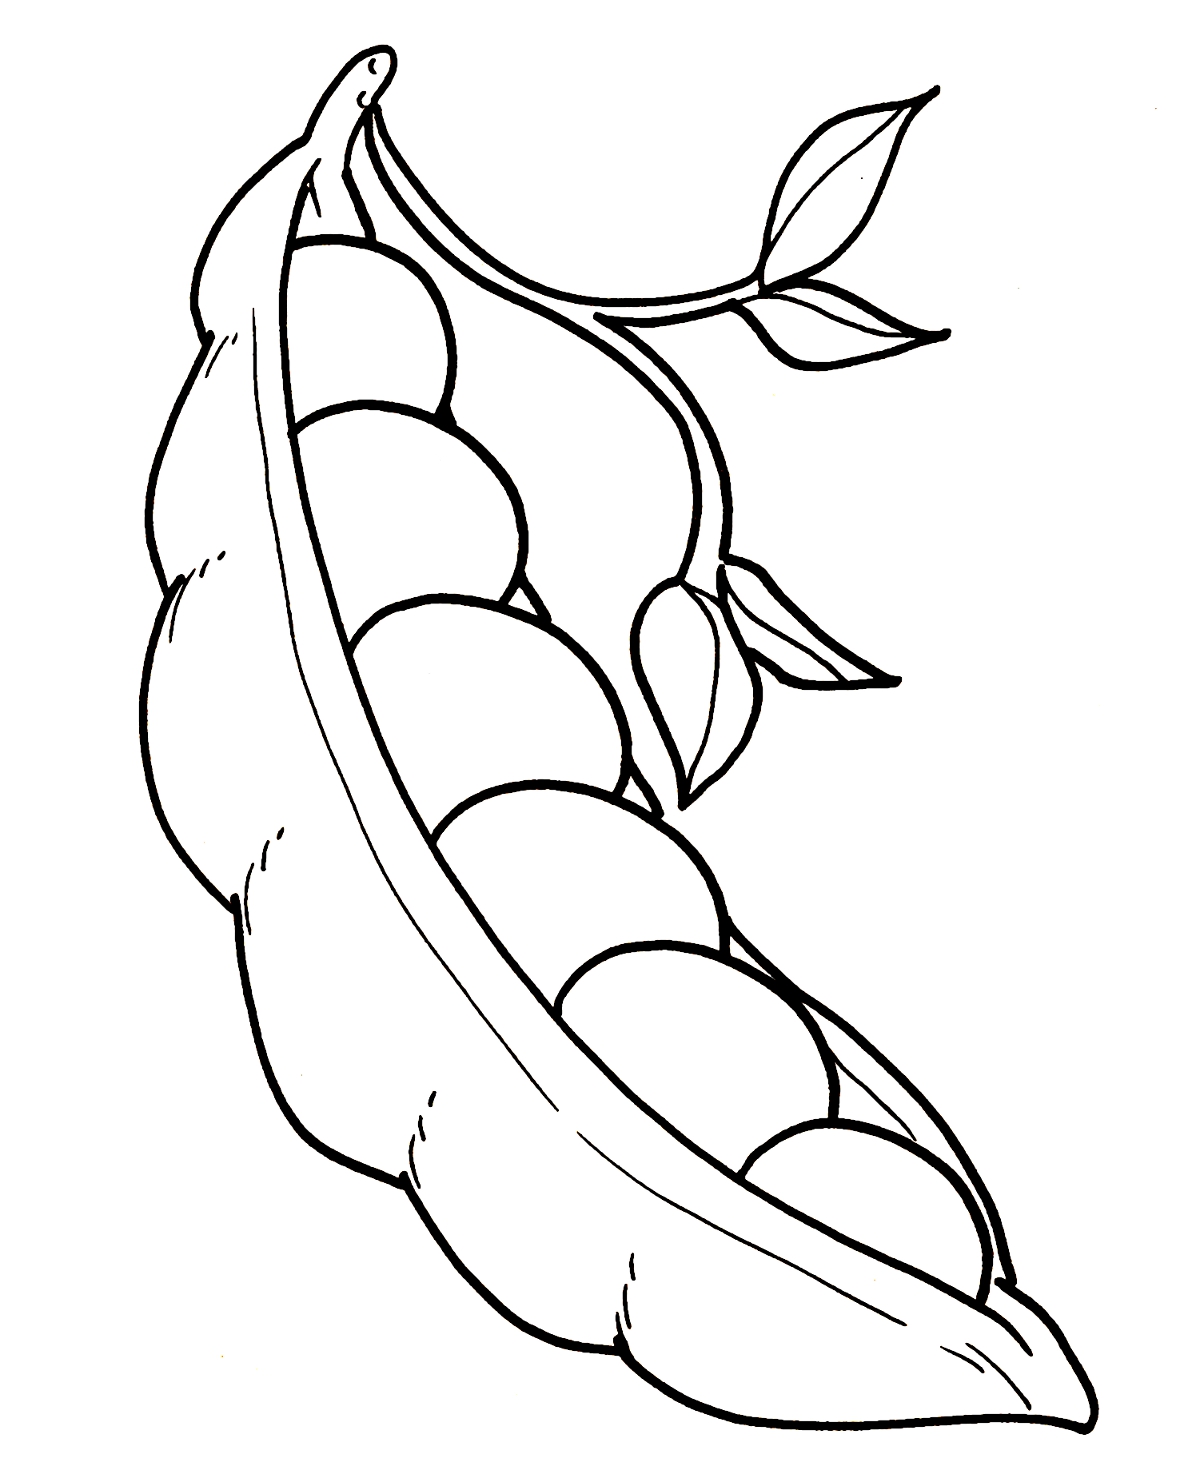 Trends For > Pea Pod Coloring Page